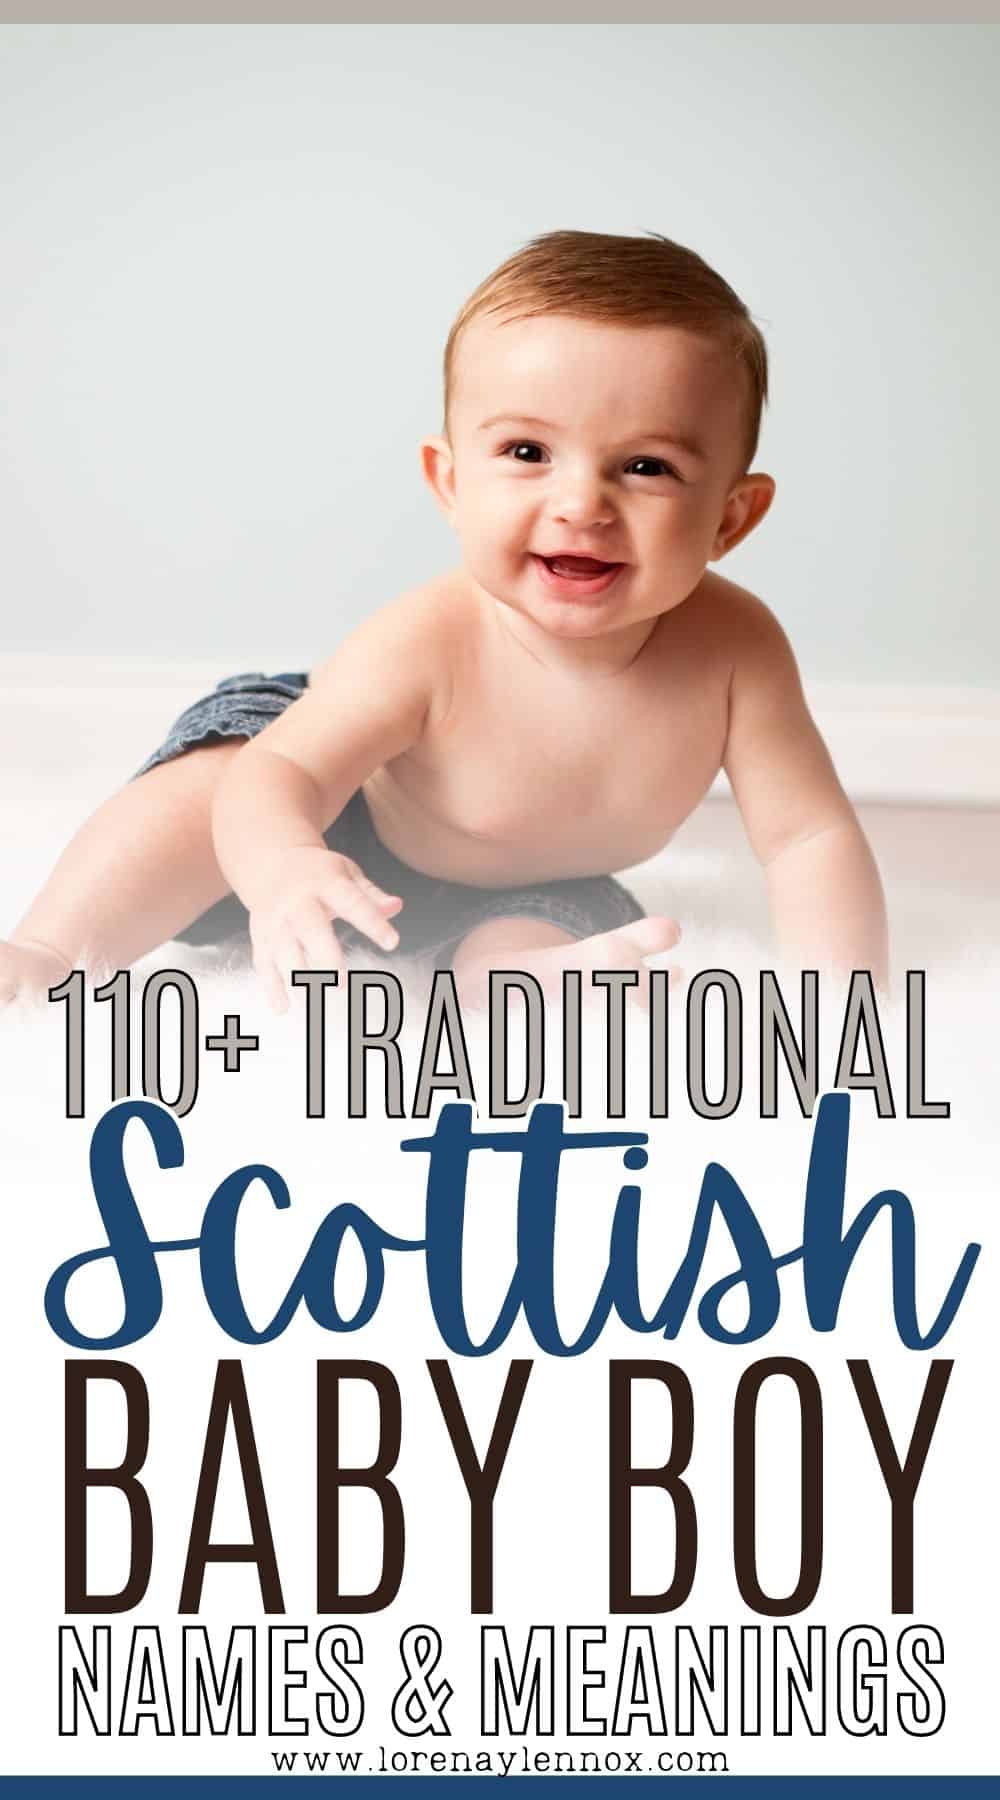 Discover a collection of 110 unique and meaningful Scottish baby boy names. From traditional Gaelic names to charming choices, find the perfect name for your little one. Pin your favorites and let the naming adventure begin! #ScottishBabyBoyNames #BabyBoyNames #ScottishNames